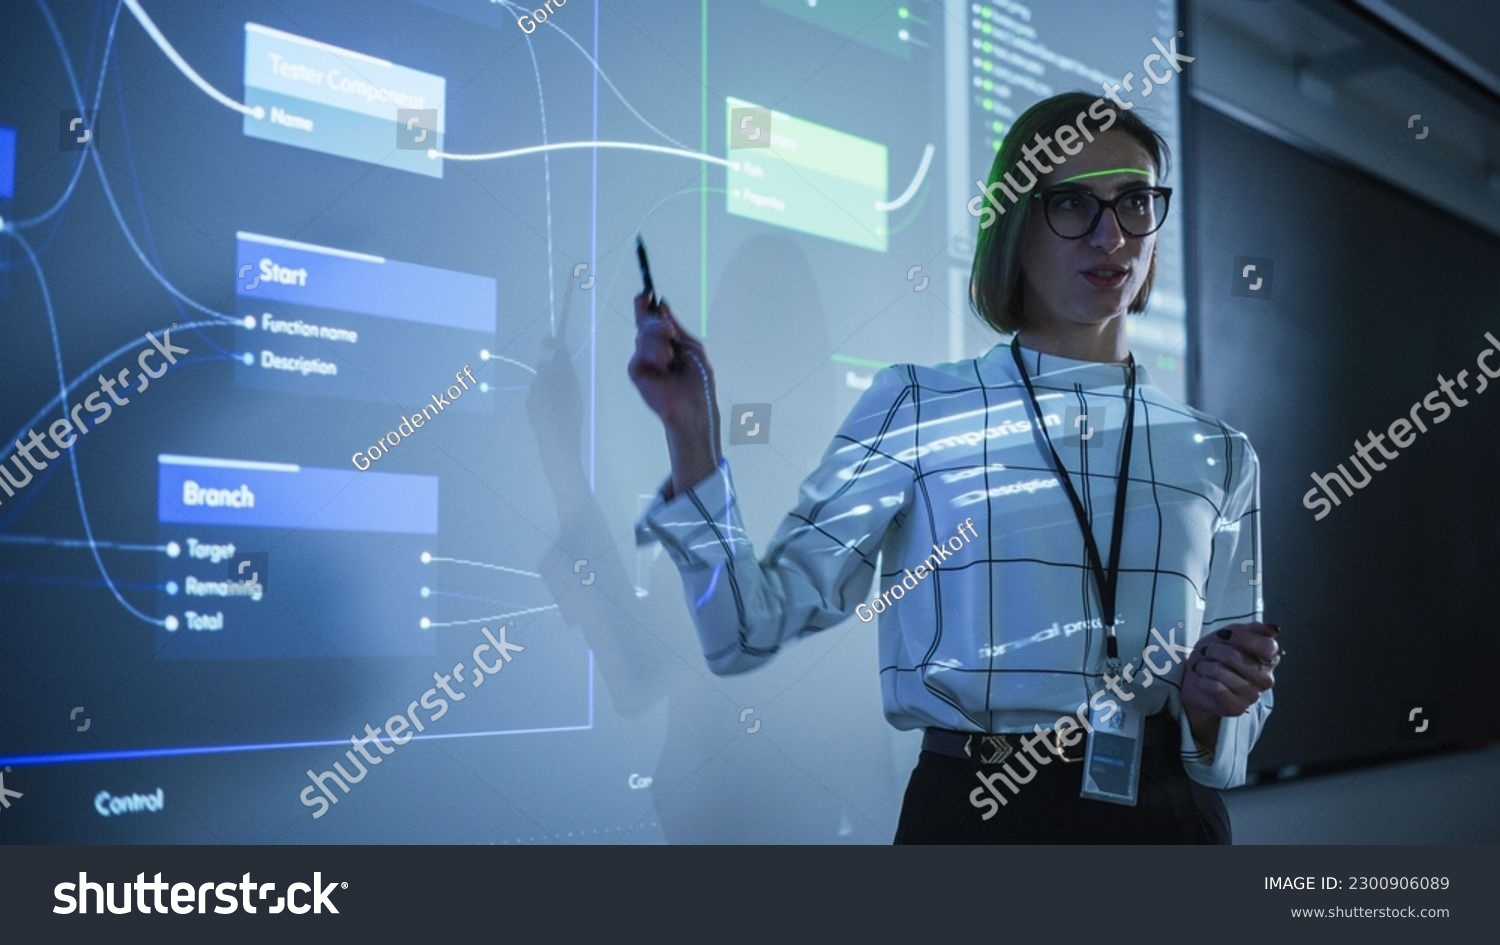 Portrait of a Young Female Professor Explaining Big Data and Artificial Intelligence Research Project in a Dark Room with a Screen Showing a Neural Network Model. Computer Science Education in College #2300906089